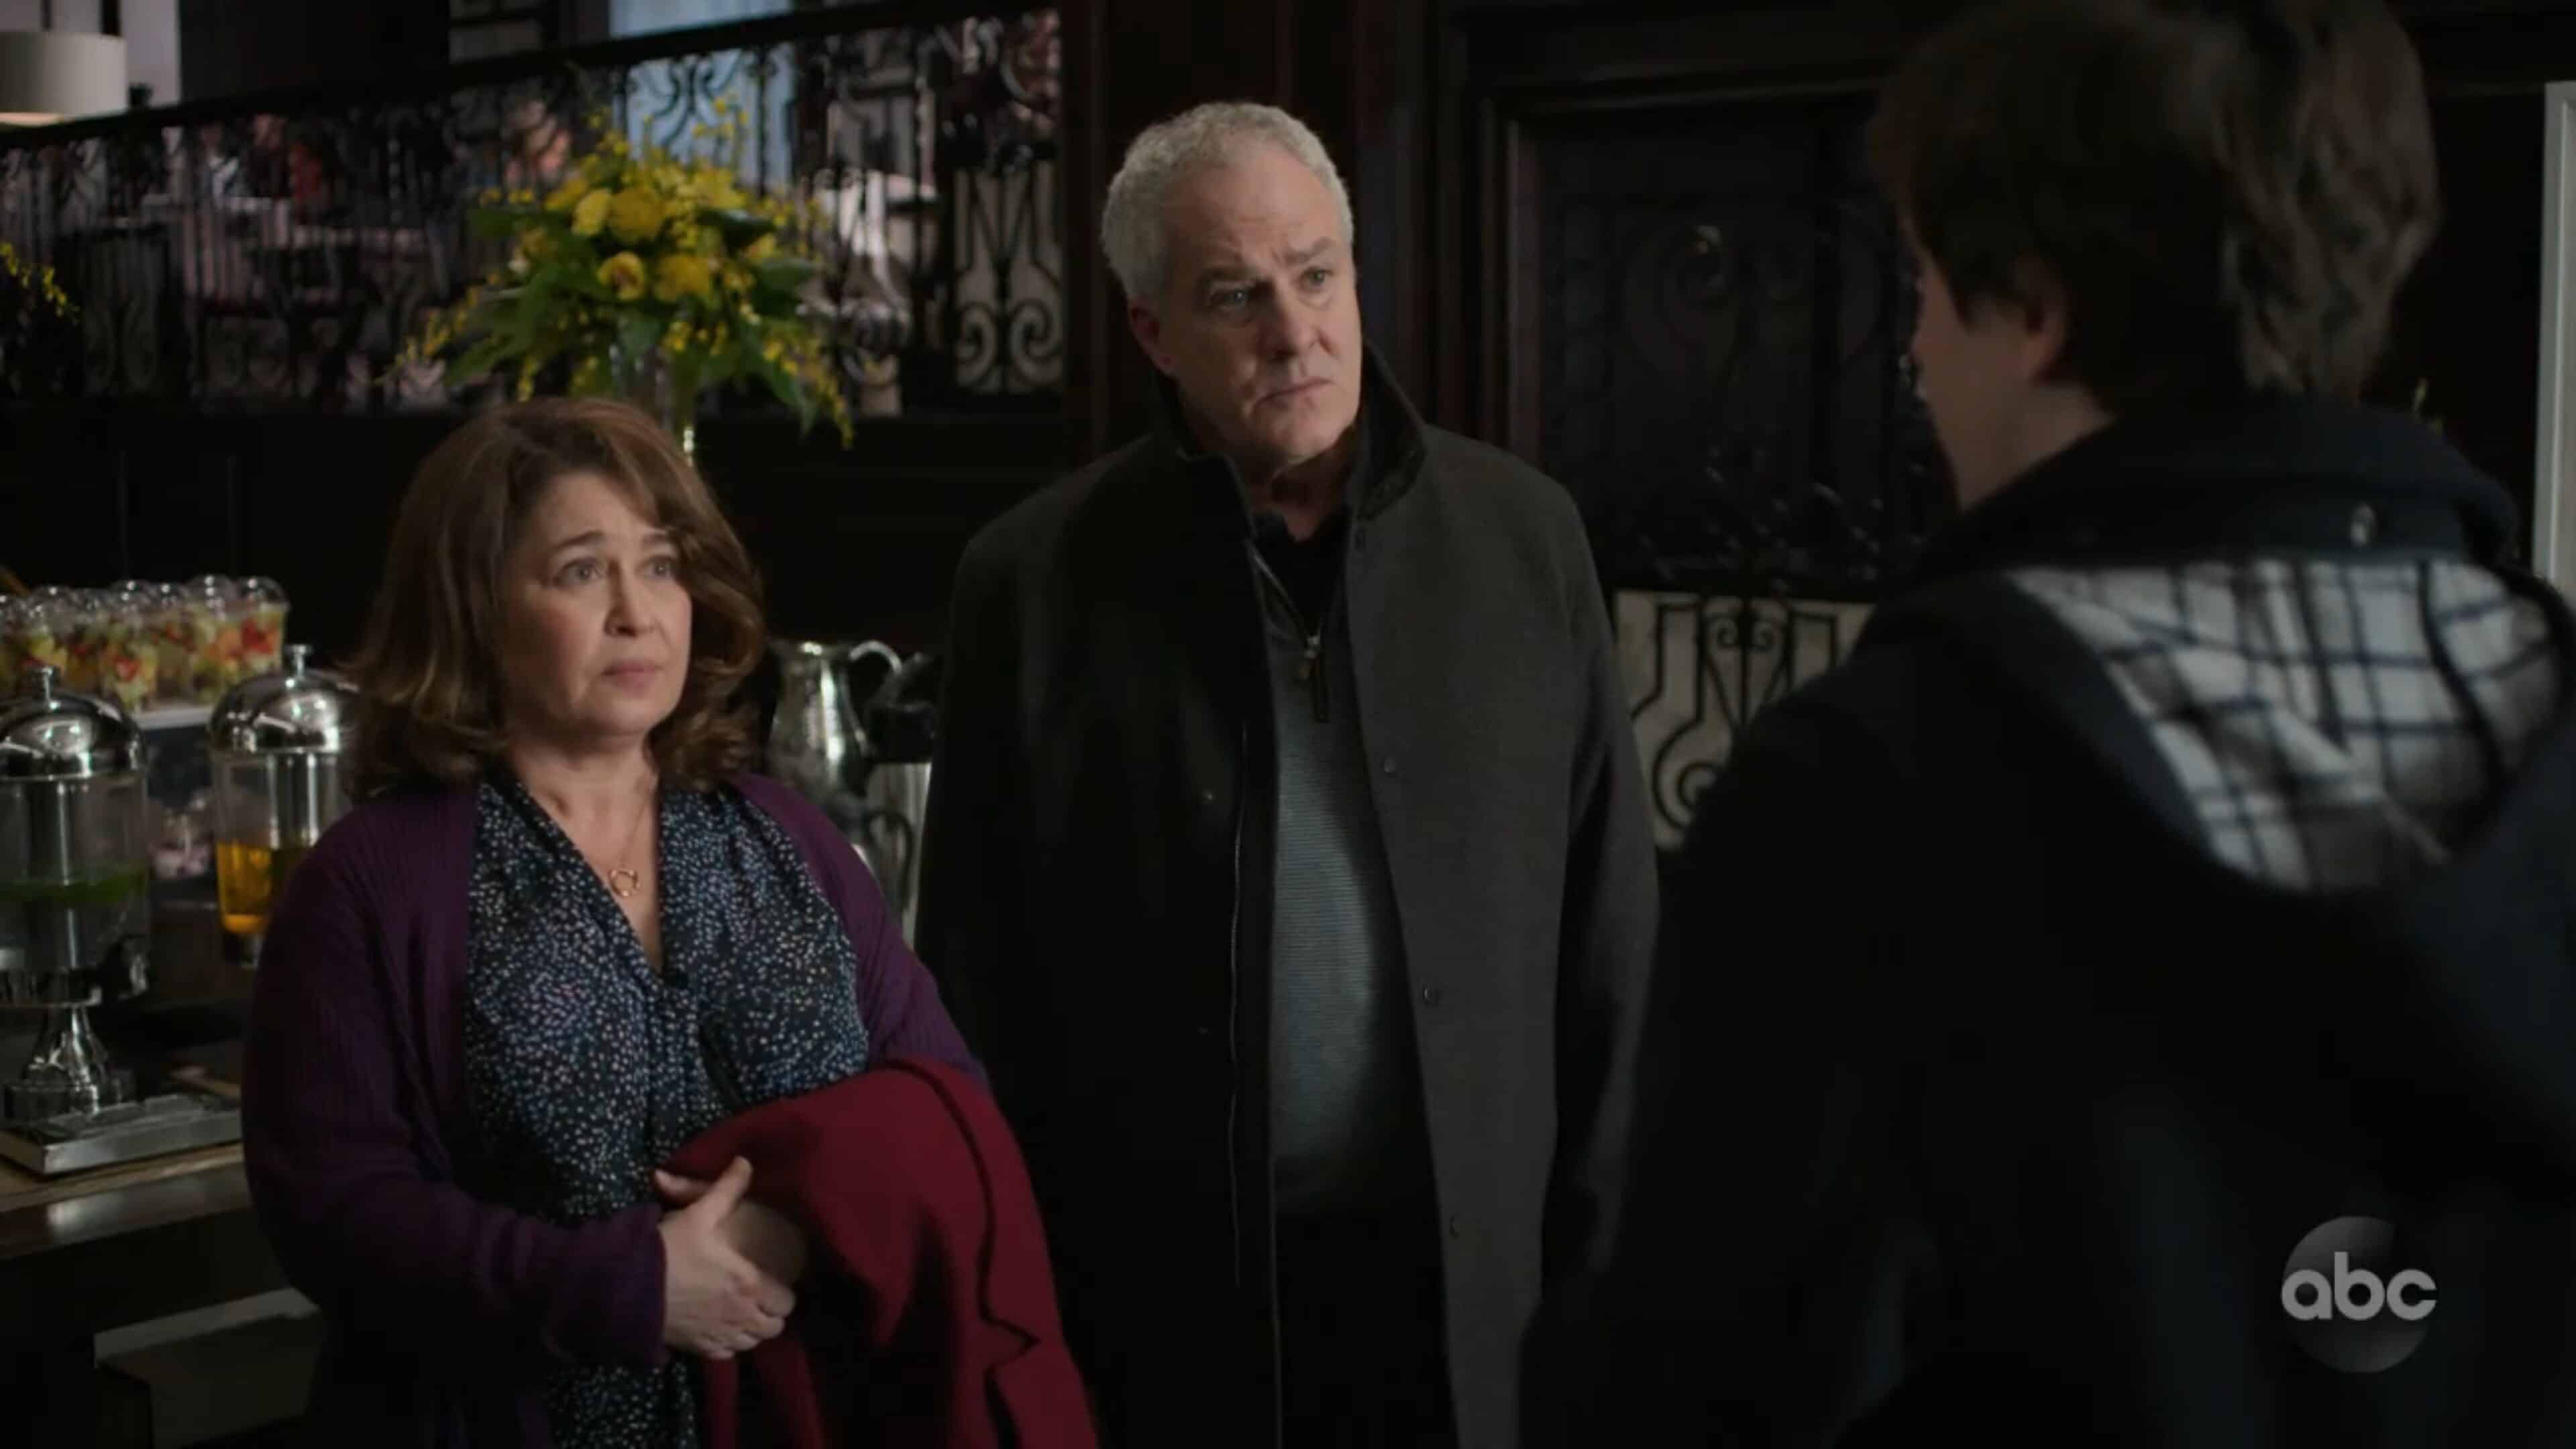 Pam (Julie Warner) and Mike (Barclay Hope), Lea's parents